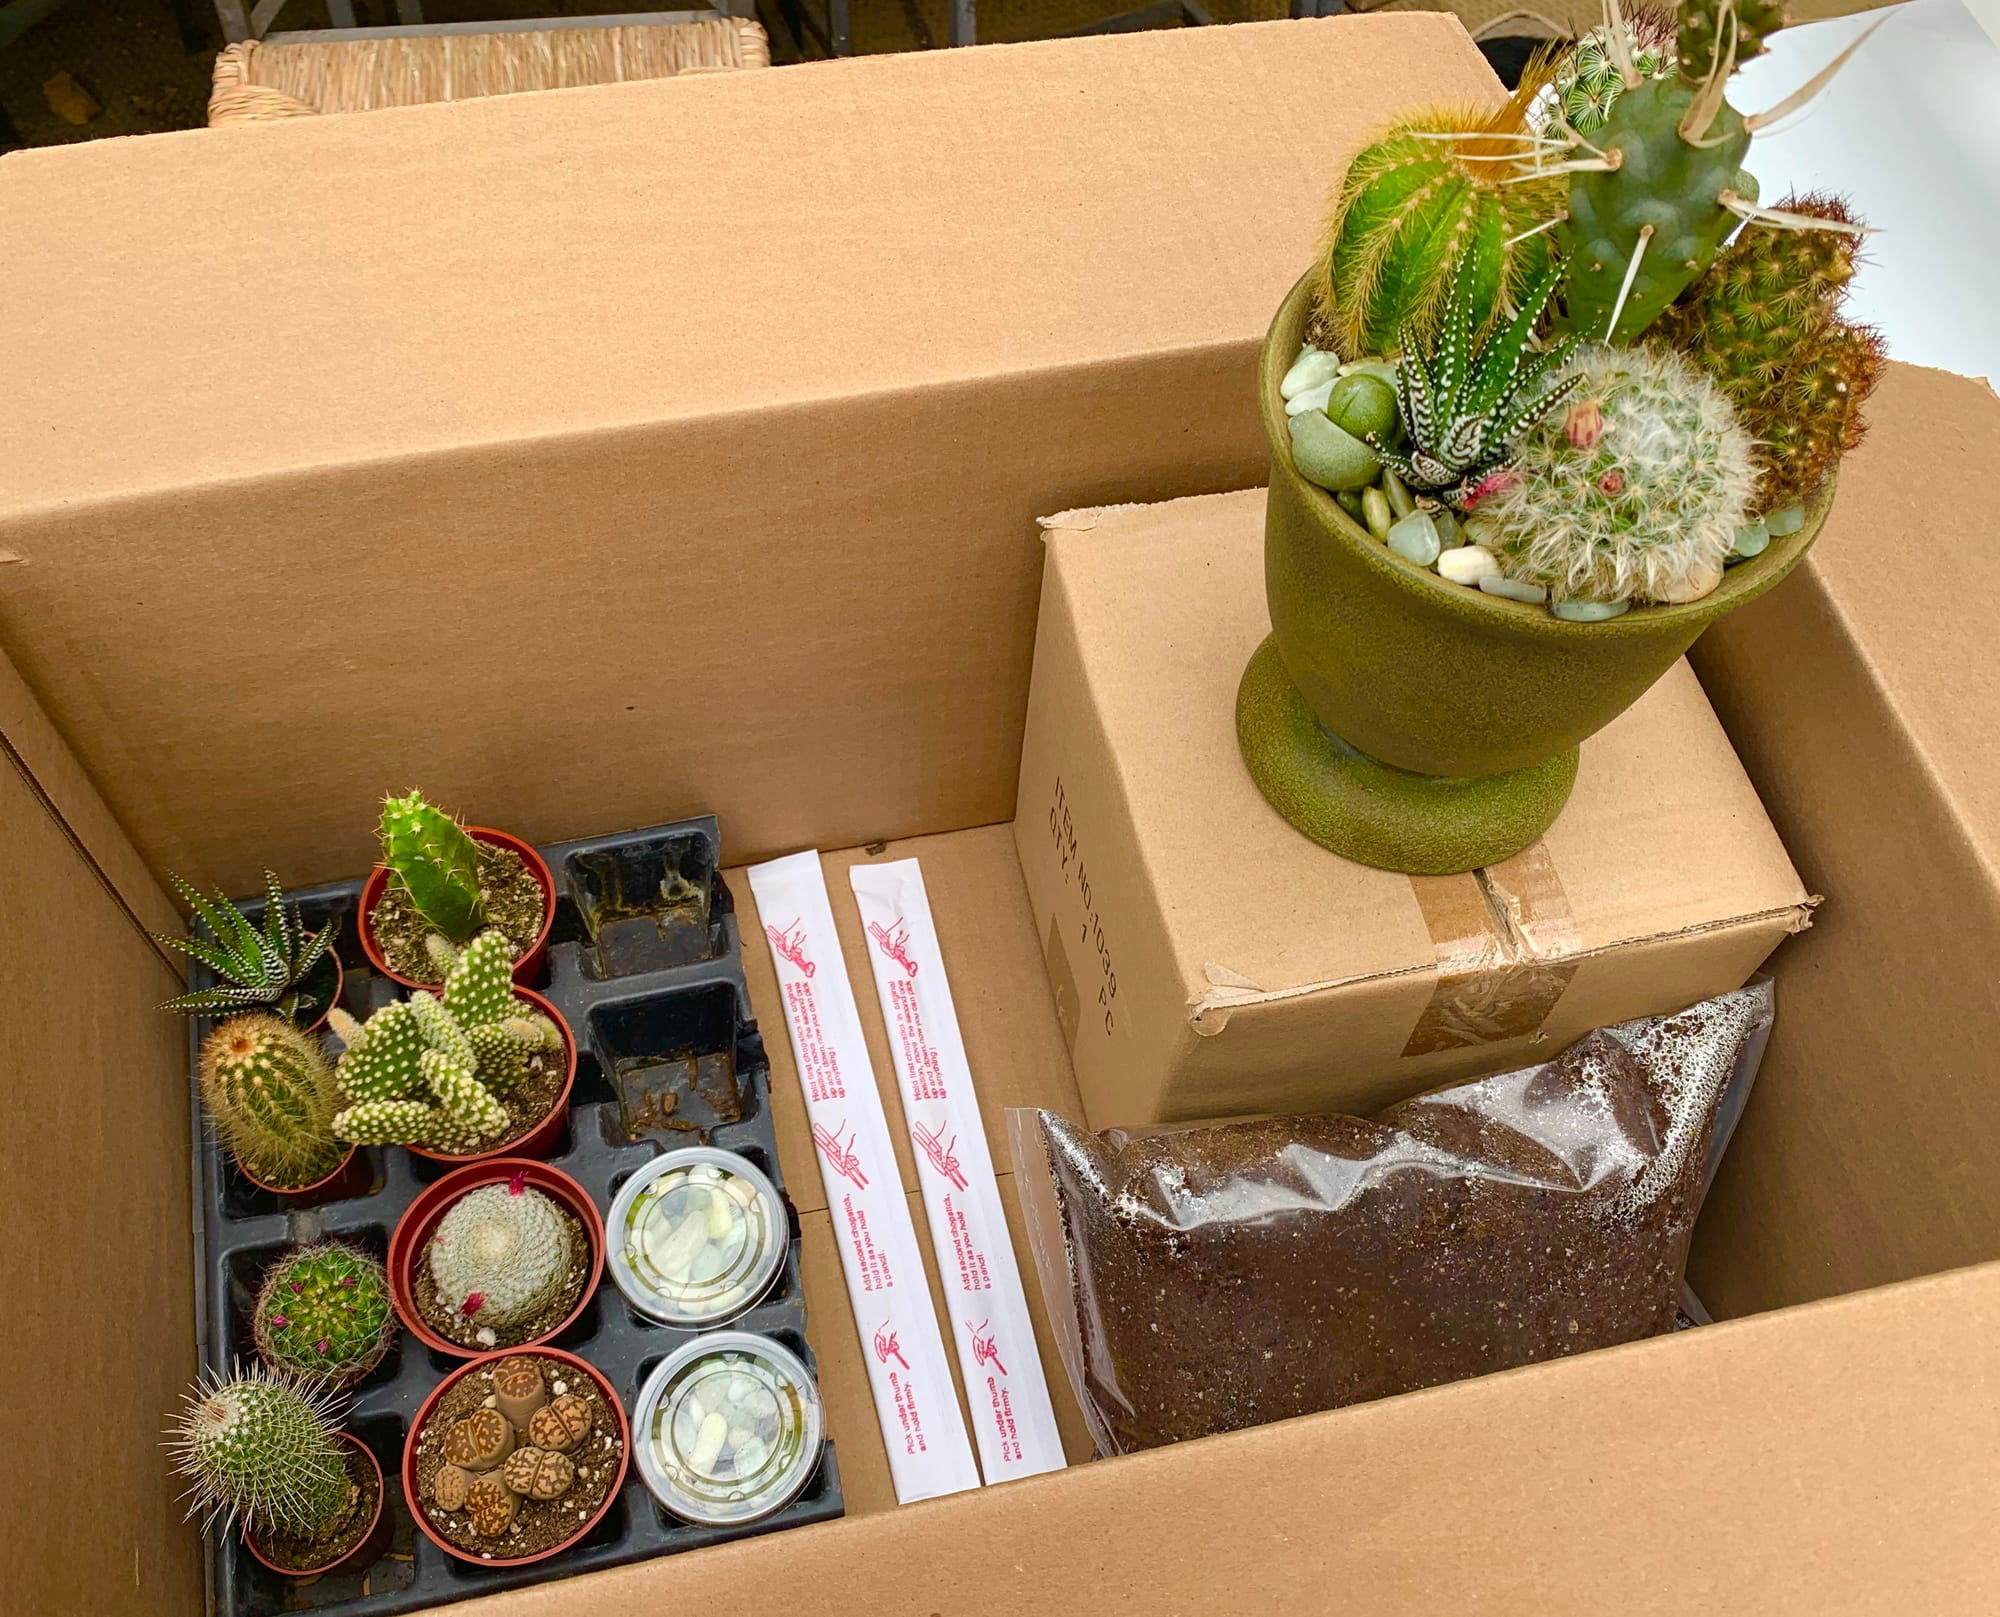 Cactus Class available as a kit to take home OR book a private in-store class $75